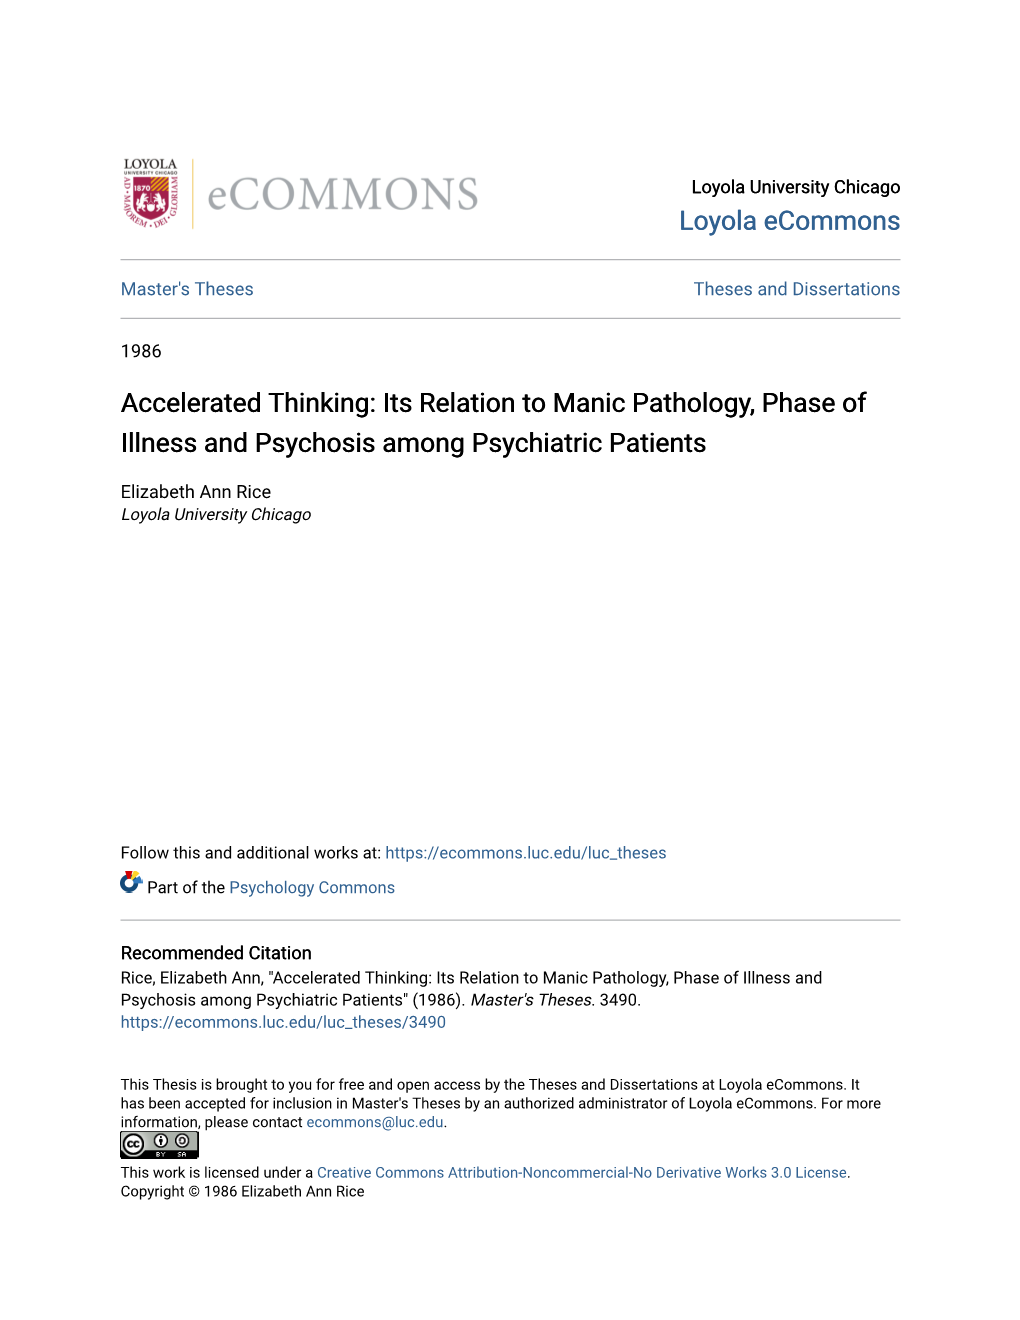 Accelerated Thinking: Its Relation to Manic Pathology, Phase of Illness and Psychosis Among Psychiatric Patients